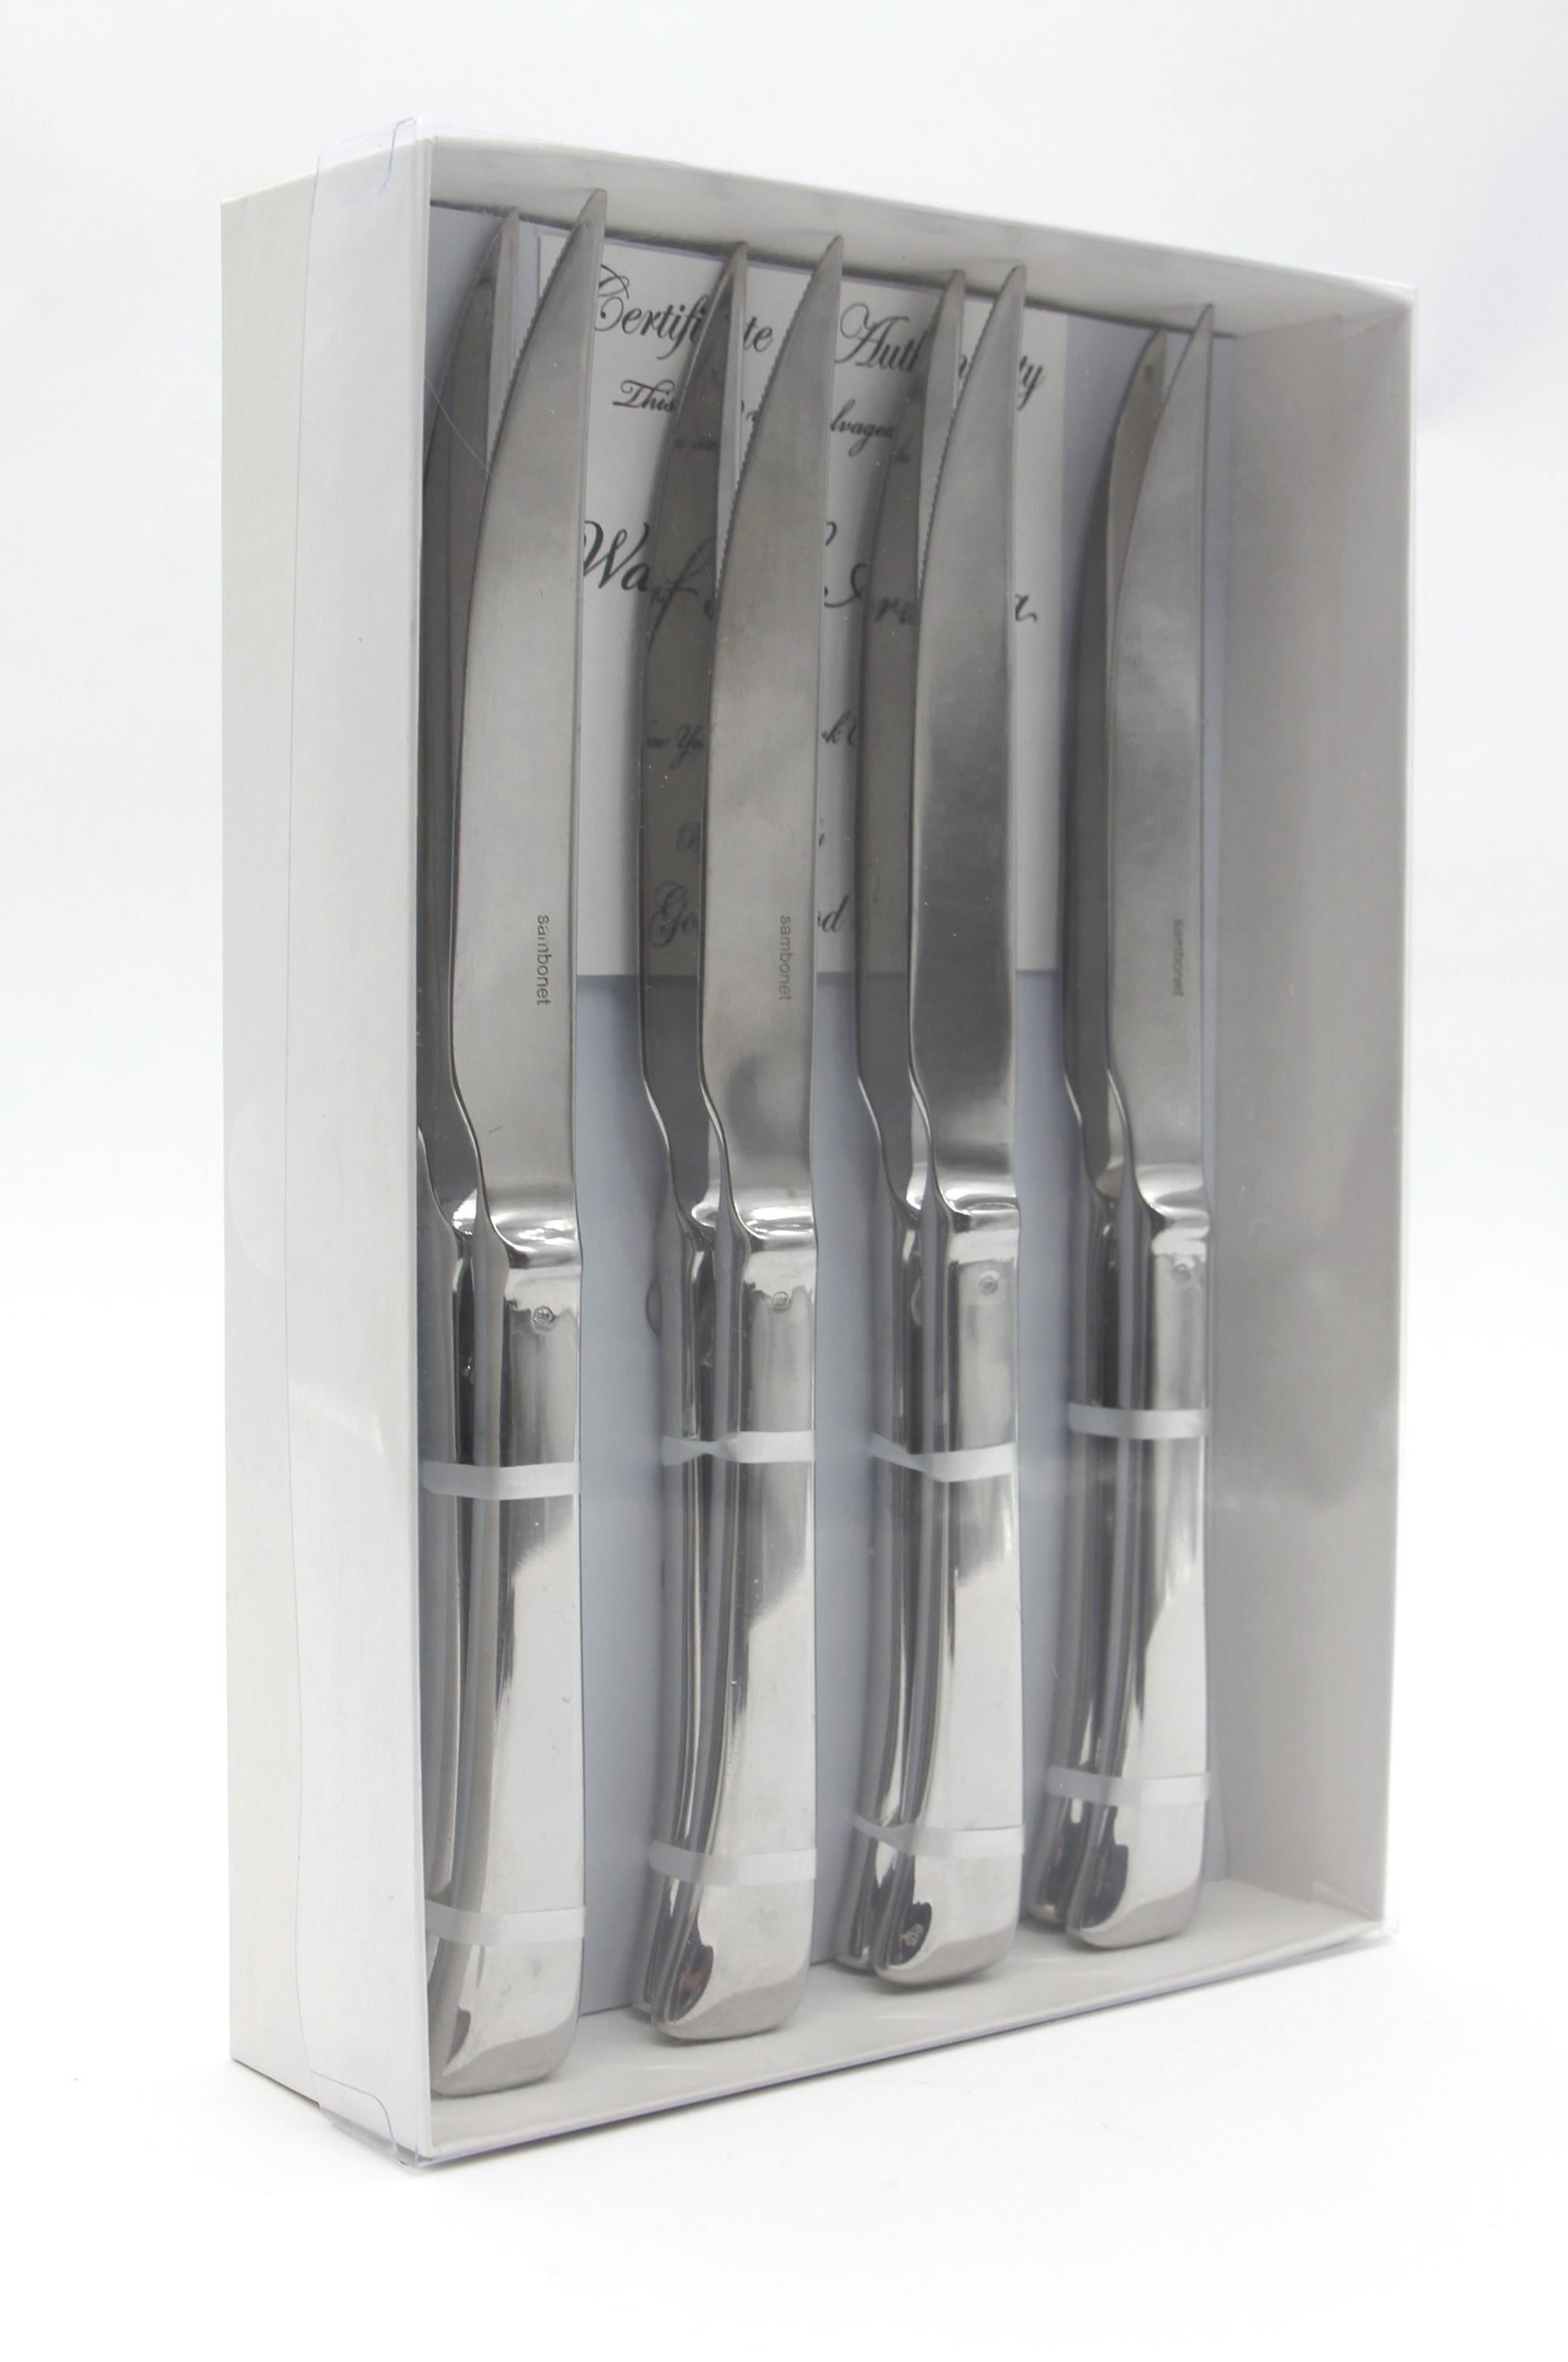 High quality stainless steel used steak knife flatware gift set. Made by Sambonet in their Imagine style. These pieces were used in one of the Waldorf Astoria Towers restaurants. This set includes a Waldorf Astoria authenticity card in the box and